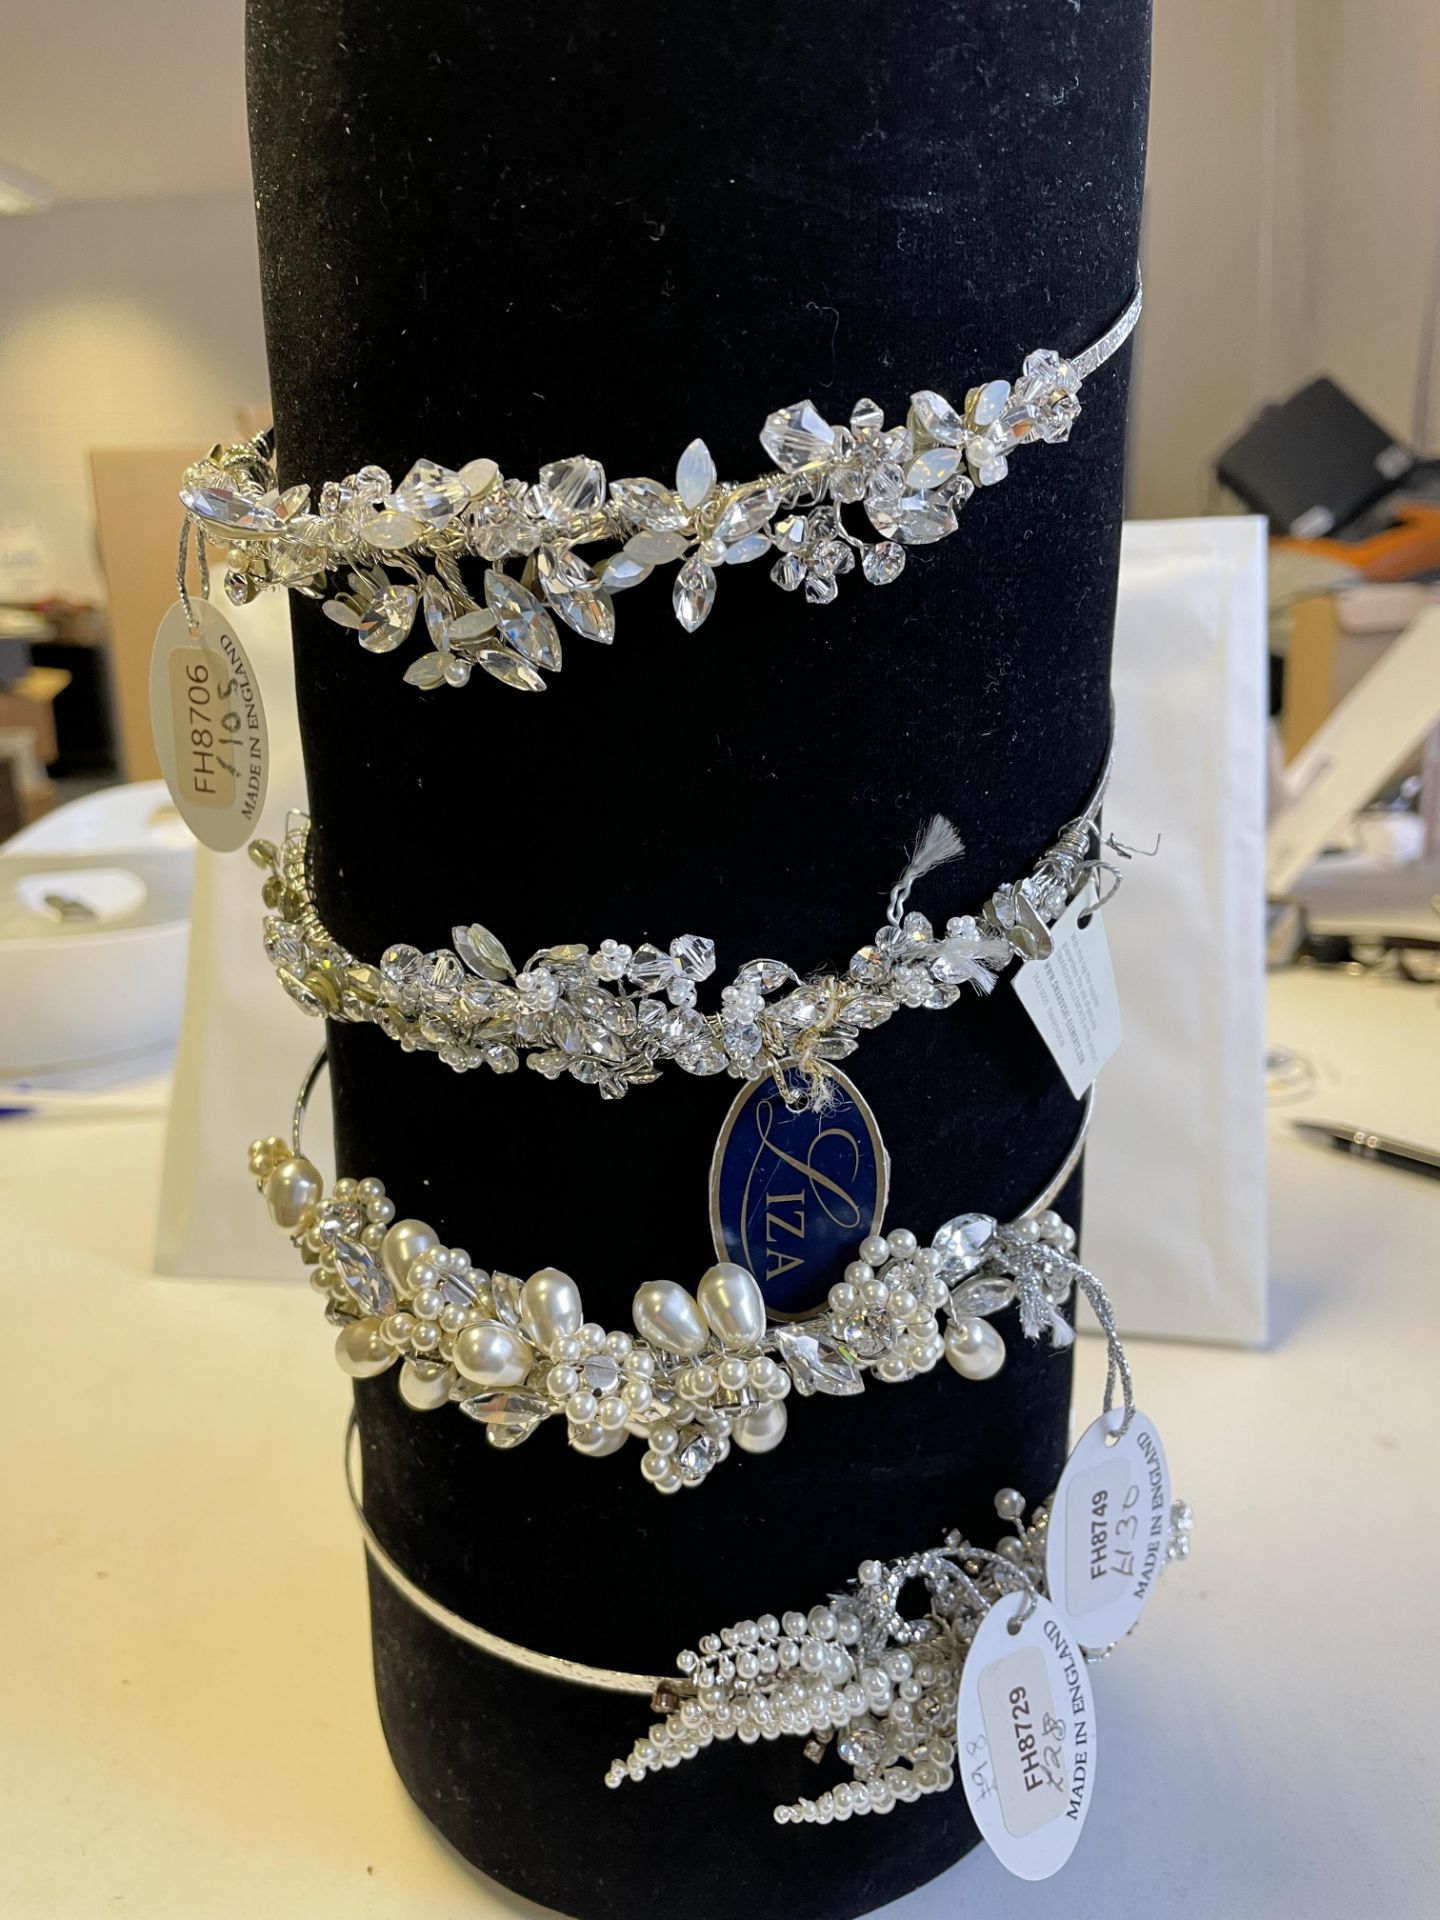 Lot of 4 x Silver and Pearl Tiaras with Swarovski Elements - CL733 - Location: Altrincham WA14 - Image 9 of 14